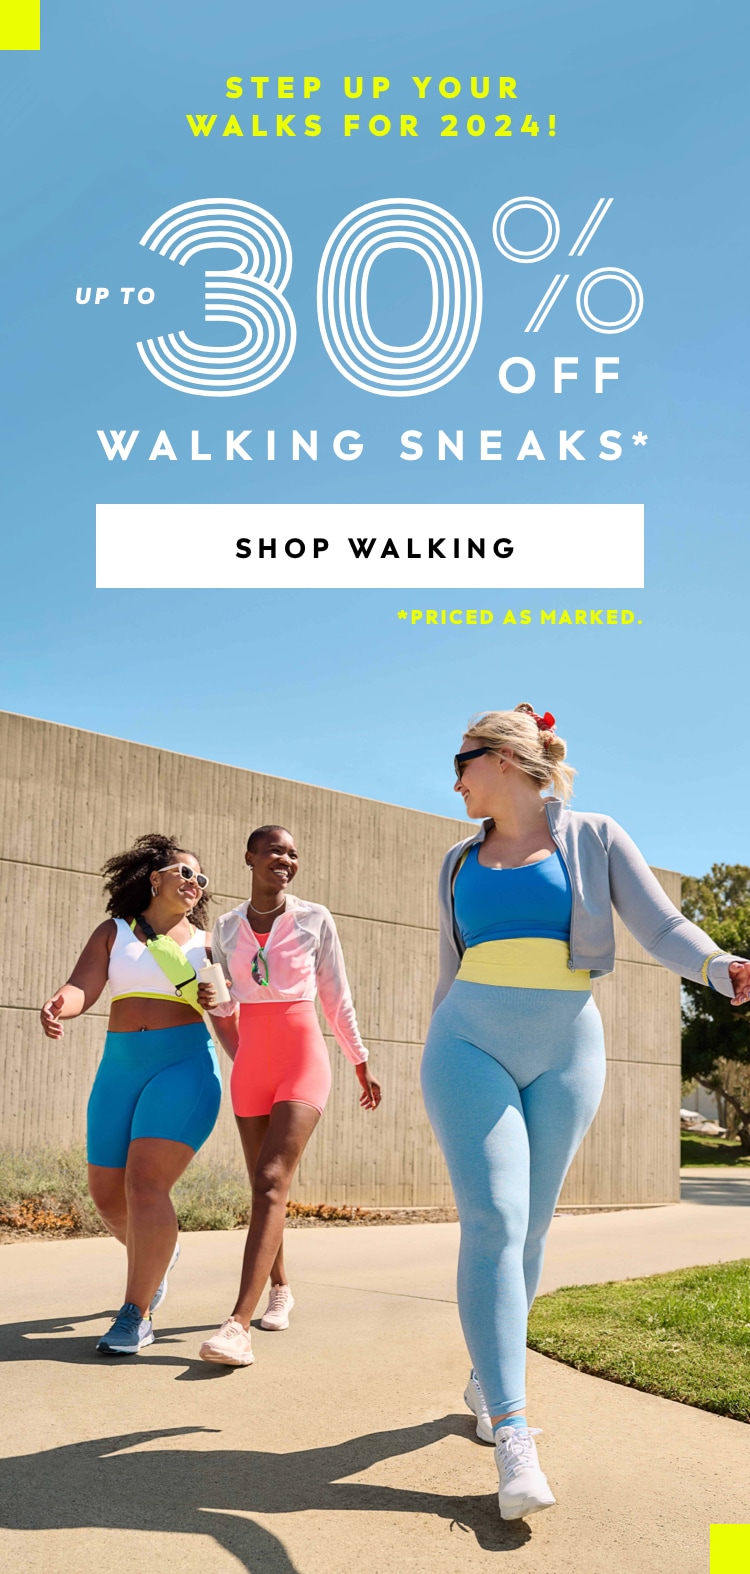 Step up your walks for 2024! Up to 30% off walking sneakers, priced as marked.